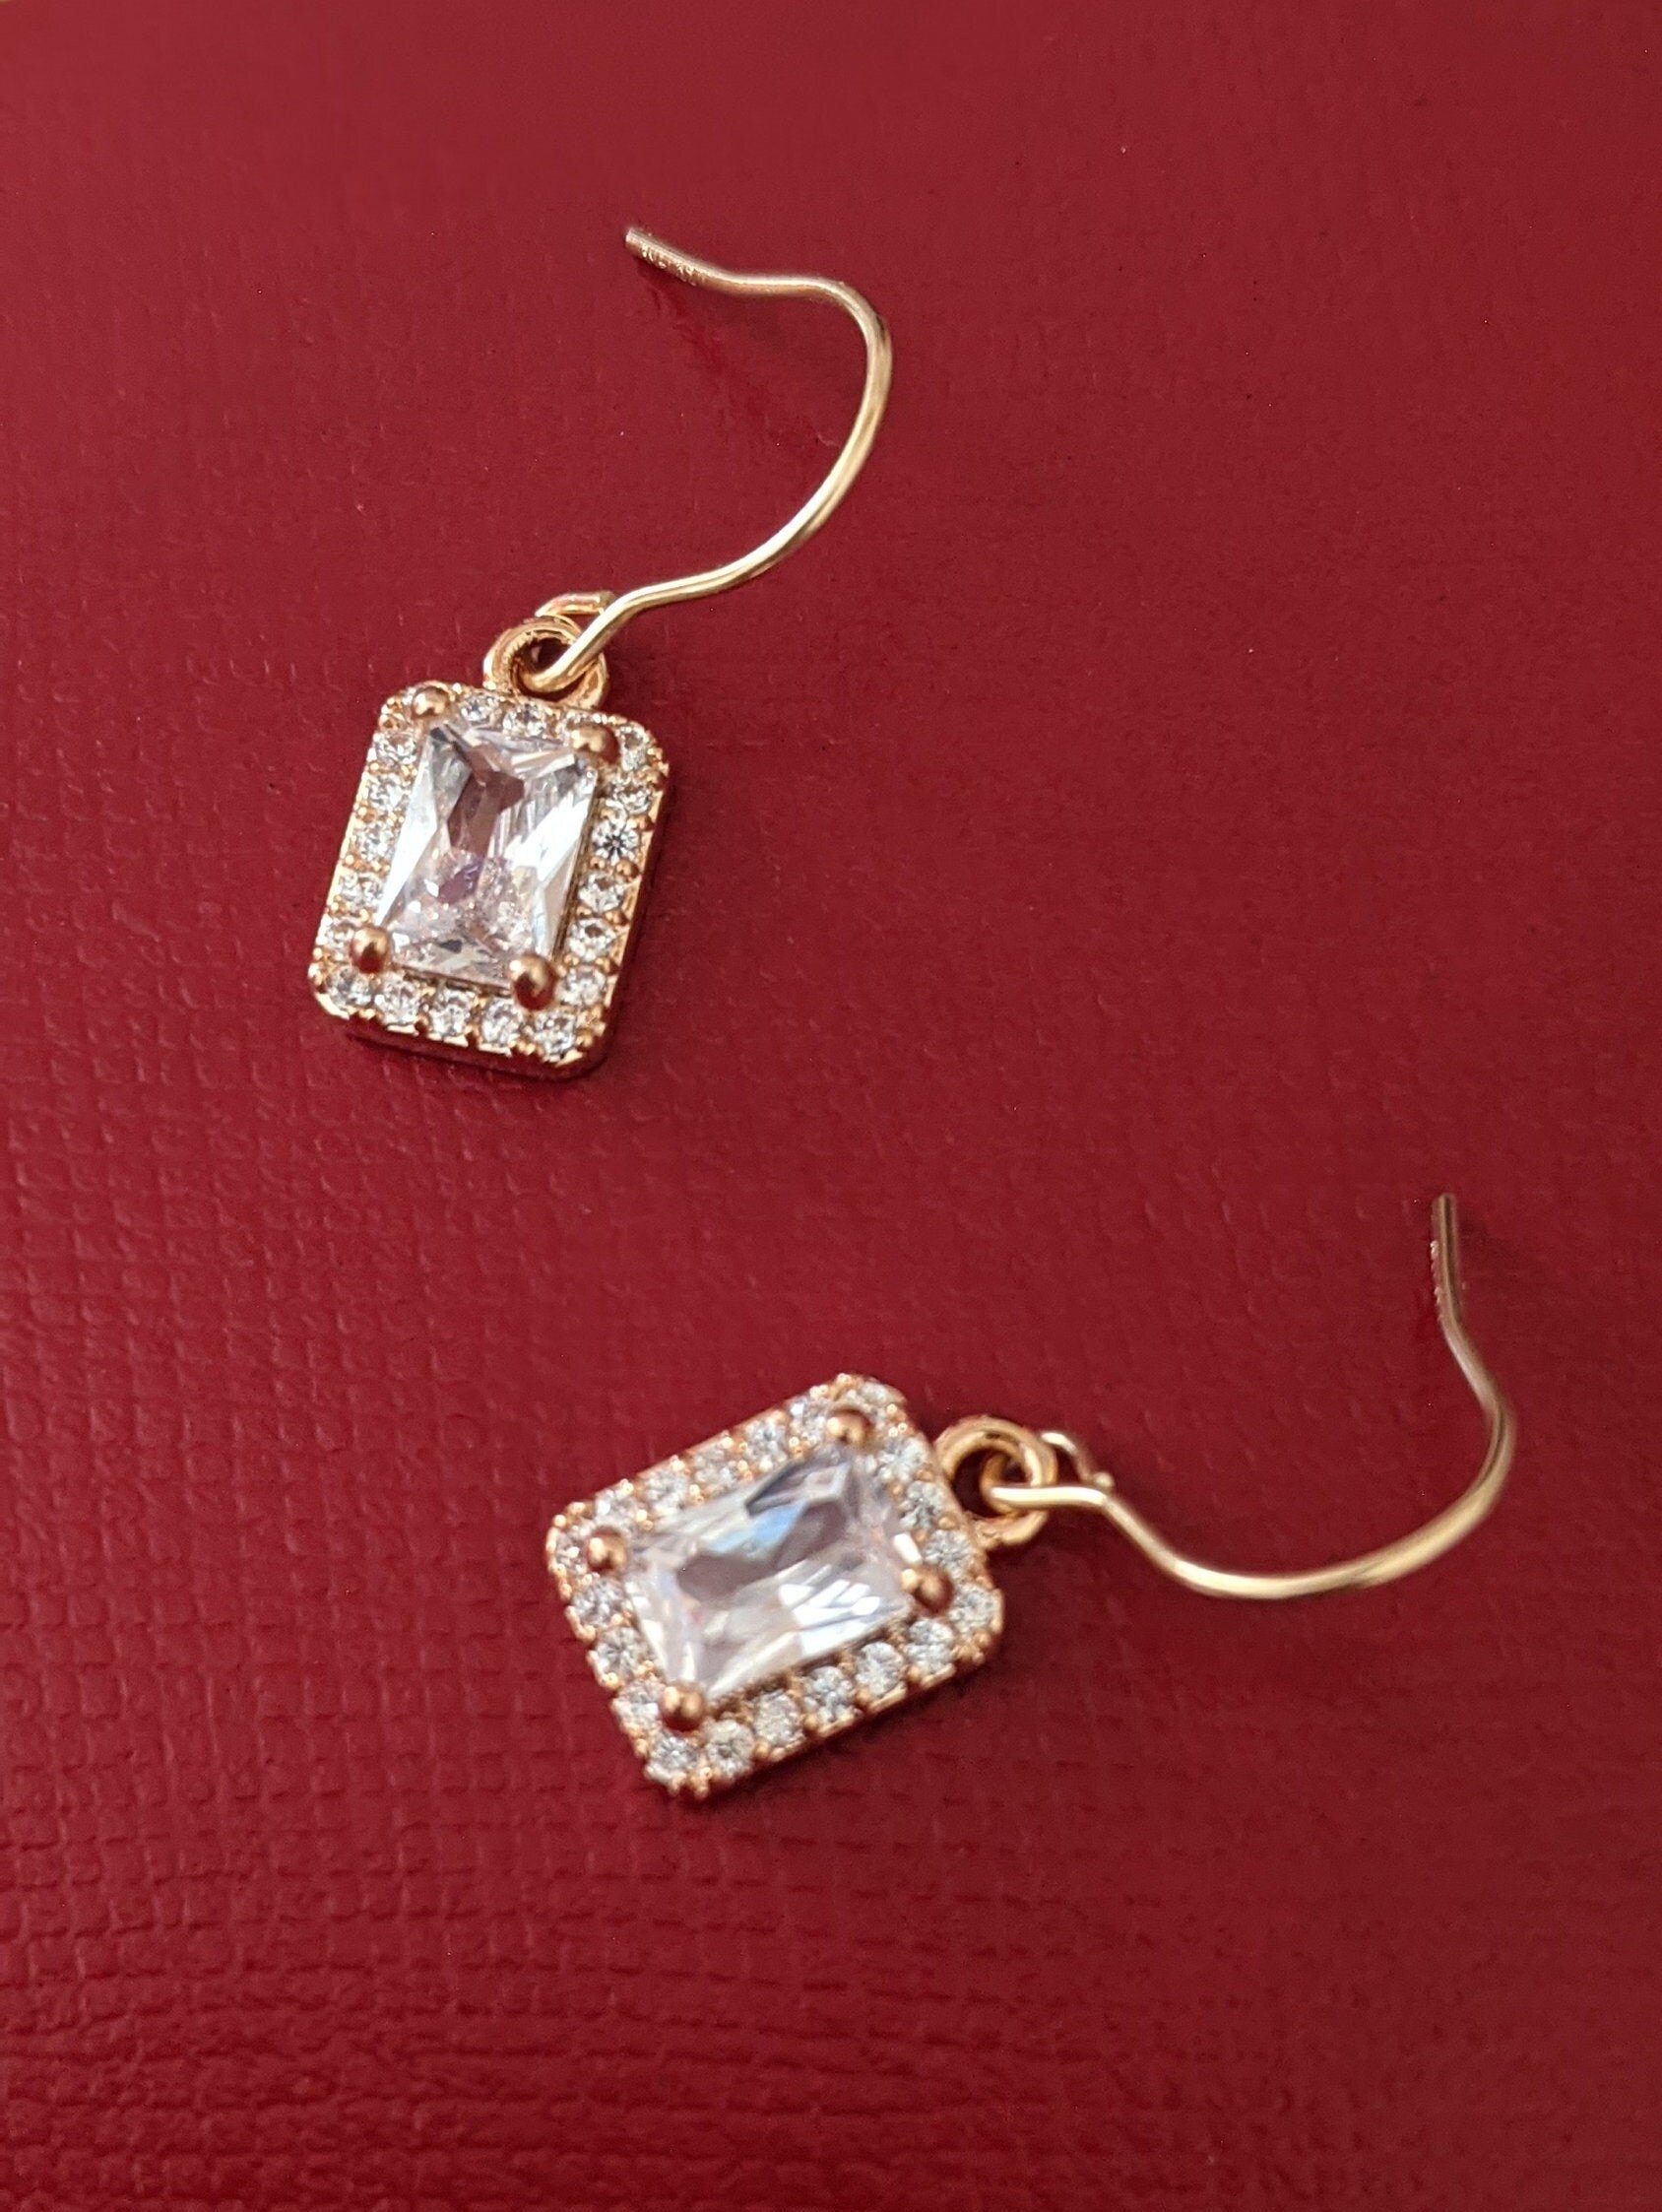 Dainty Square pendant Sparkly cubic zirconia Earrings